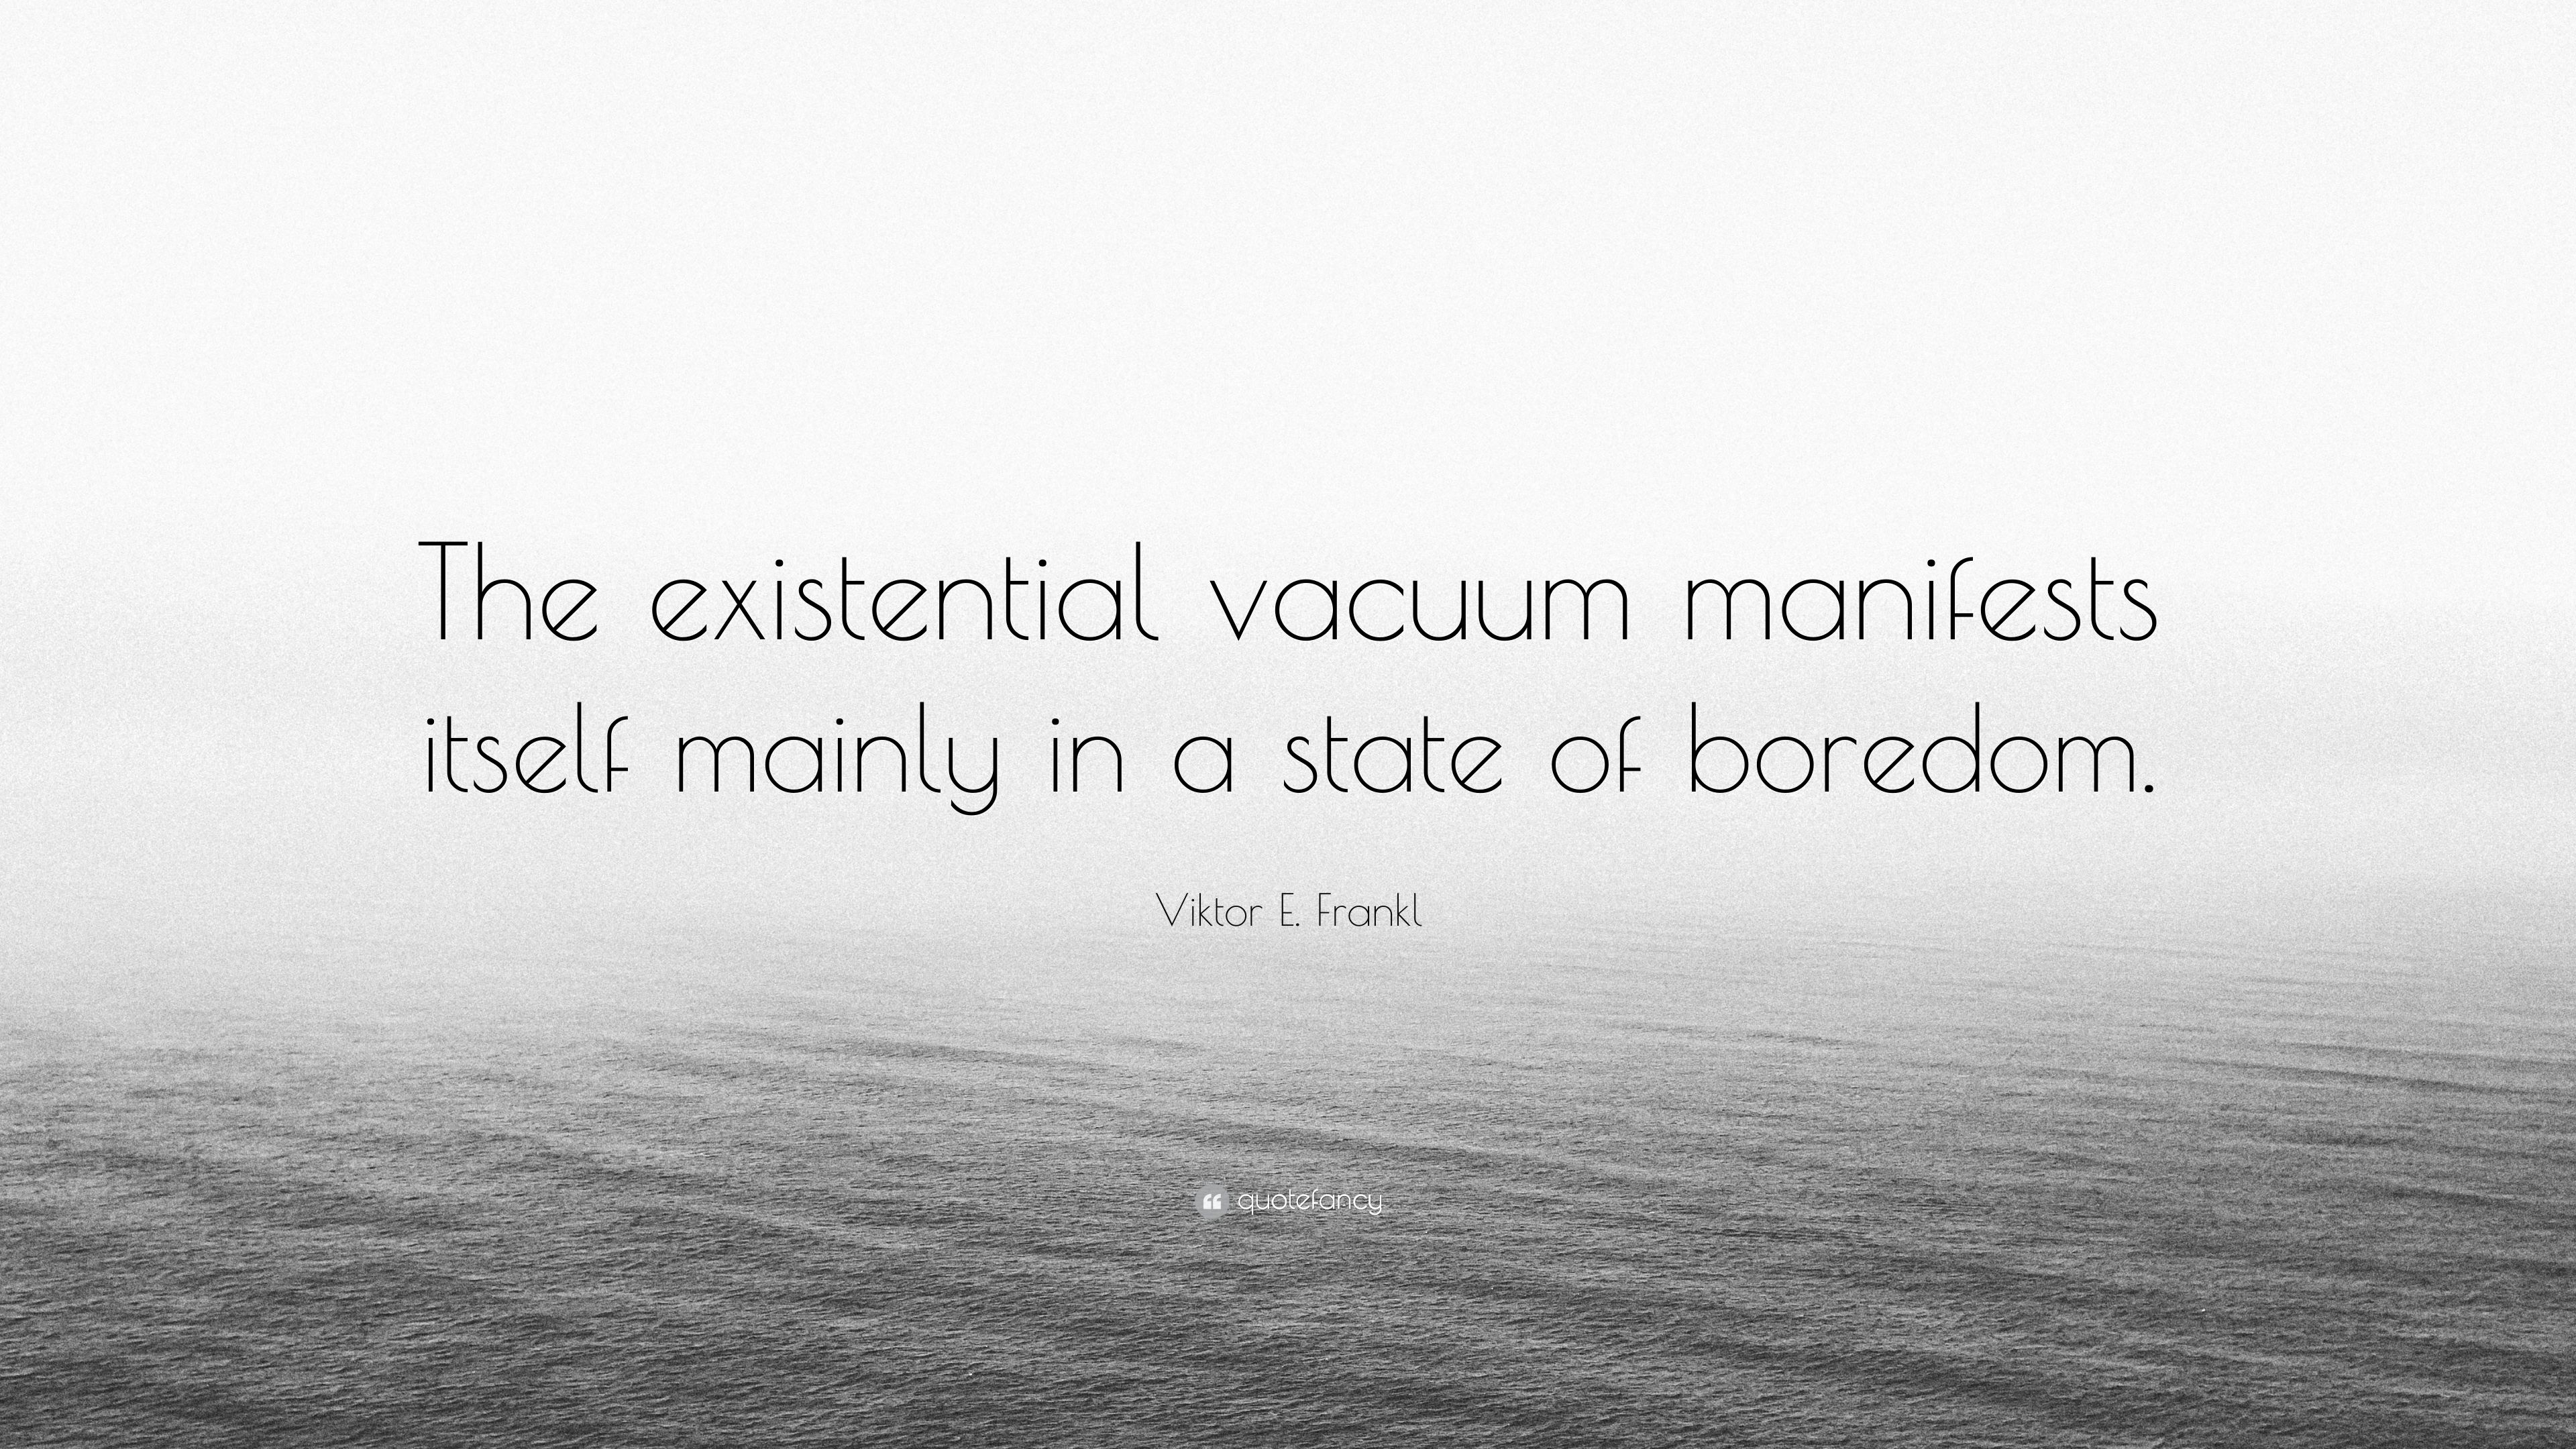 Viktor E. Frankl Quote: “The existential vacuum manifests itself mainly in a state of boredom.”